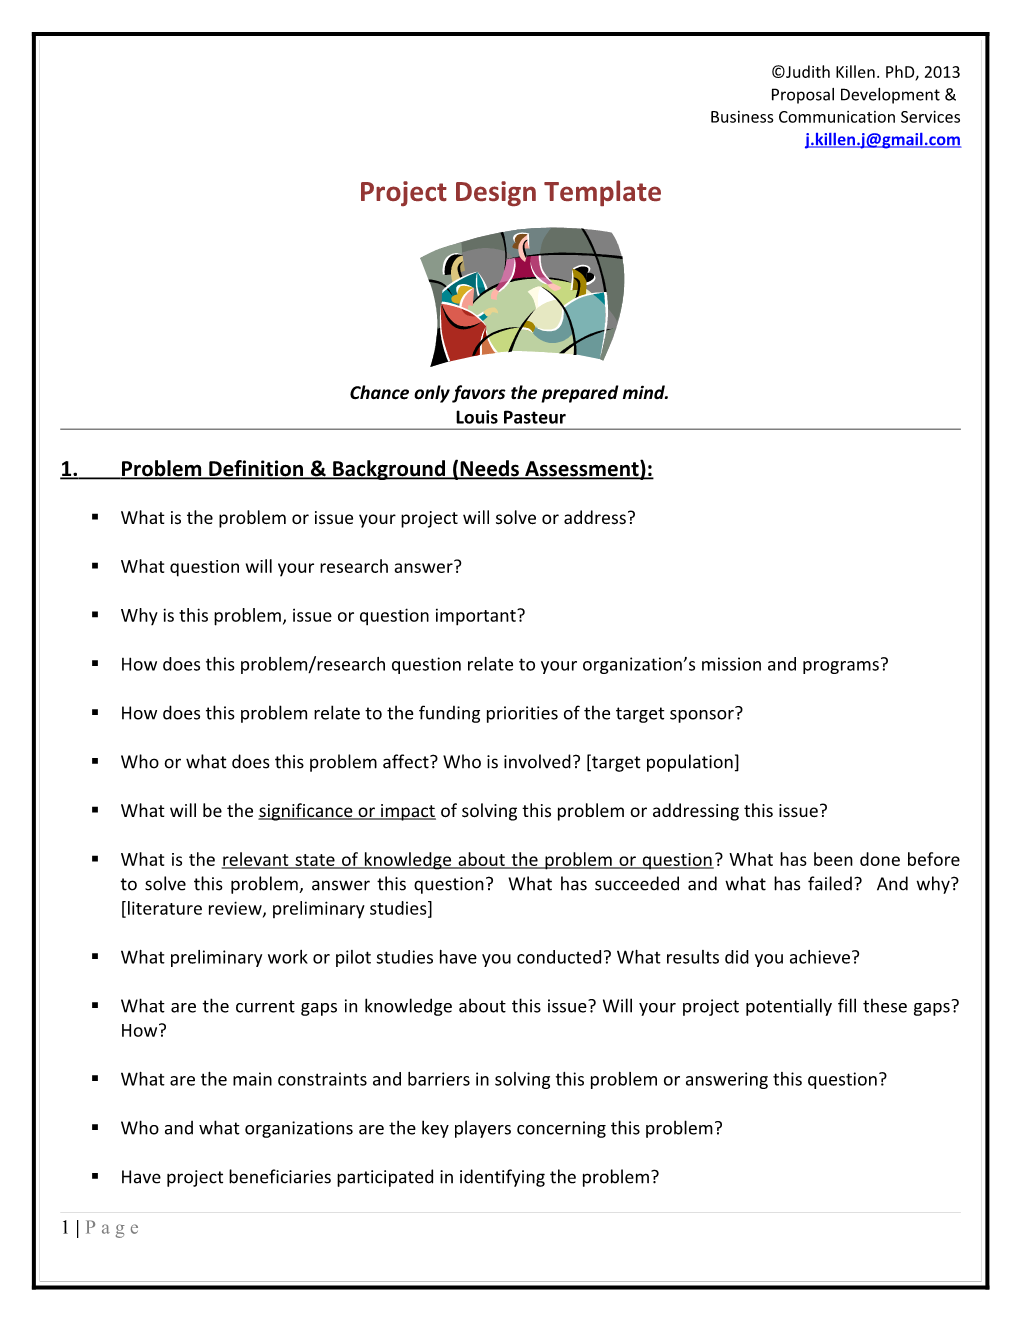 Project Design Template s1